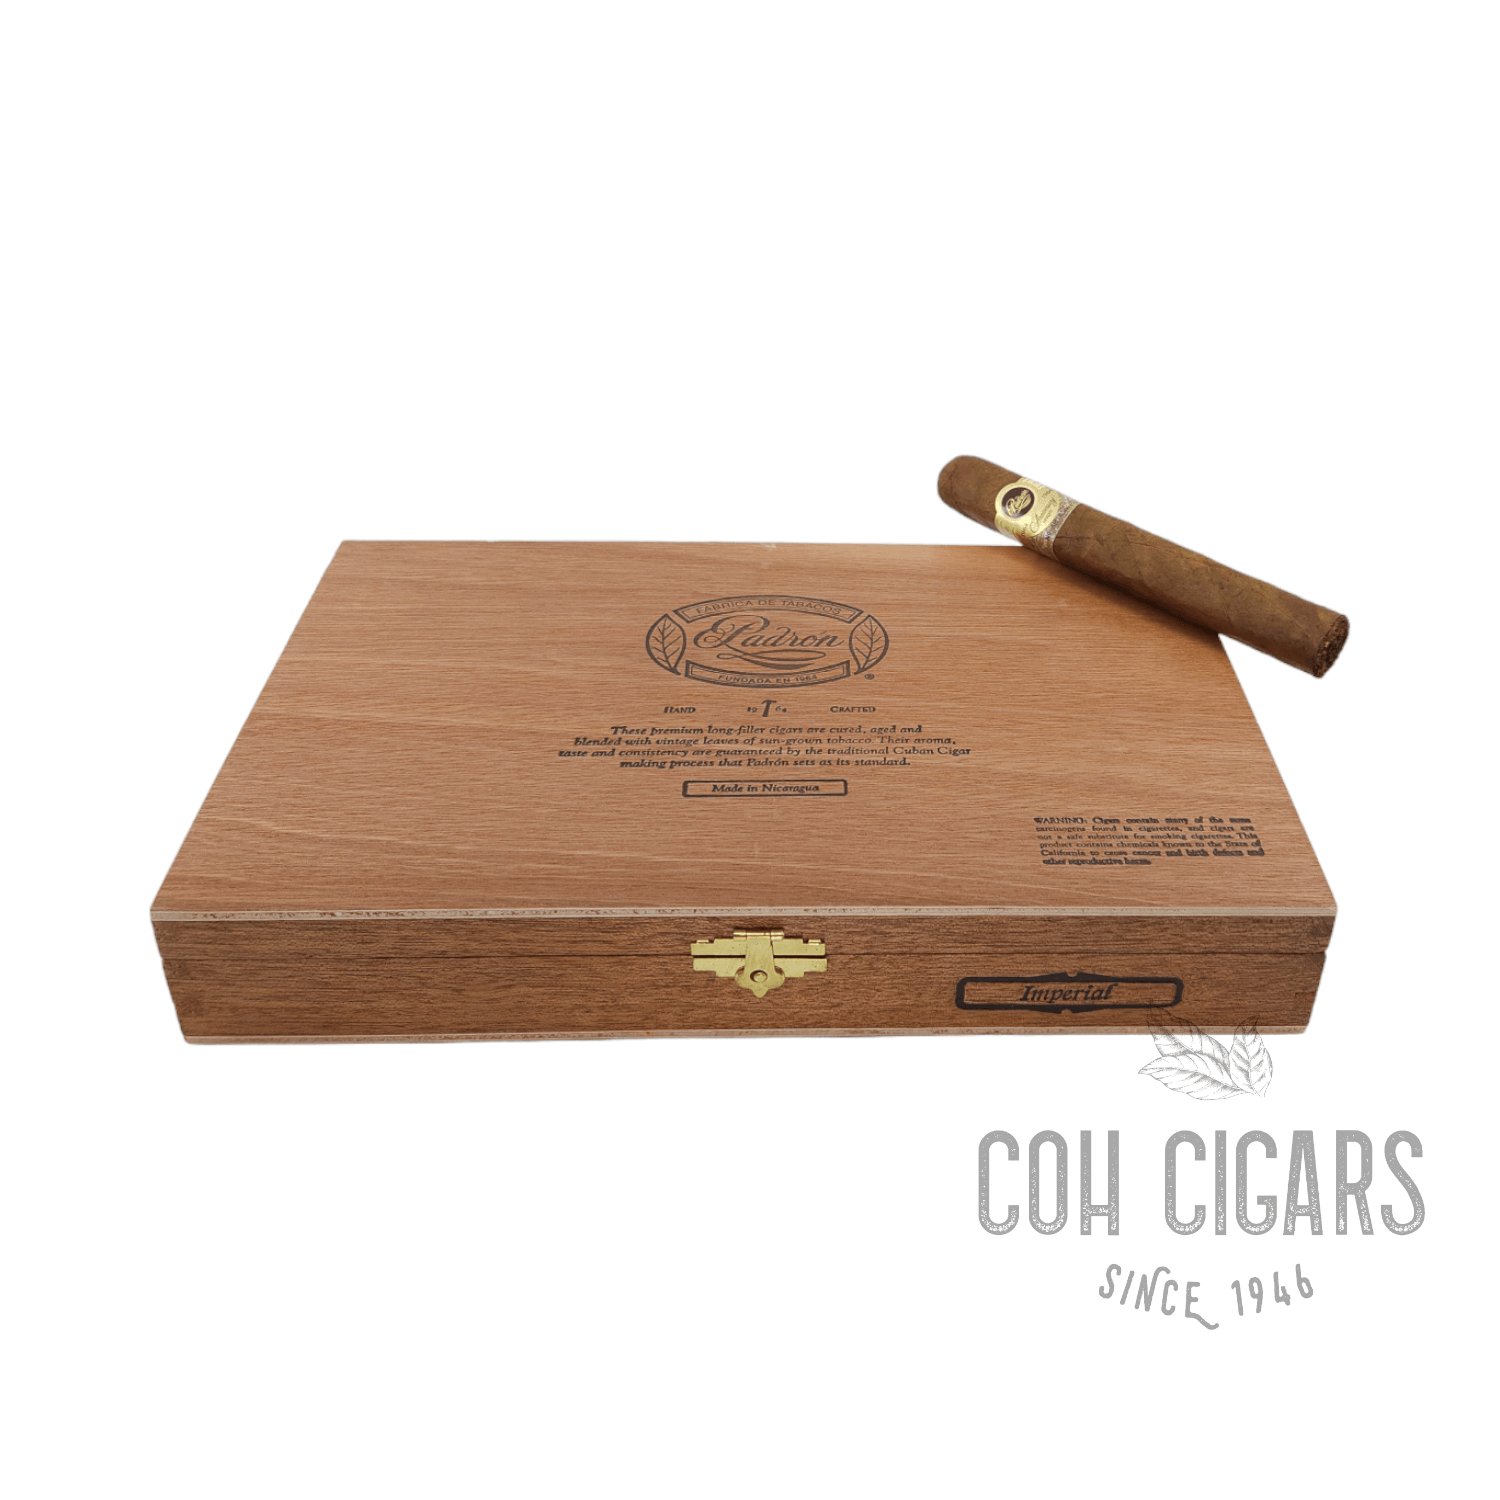 Padron 1964 Anniversary Series Imperial Natural Box 25 - hk.cohcigars